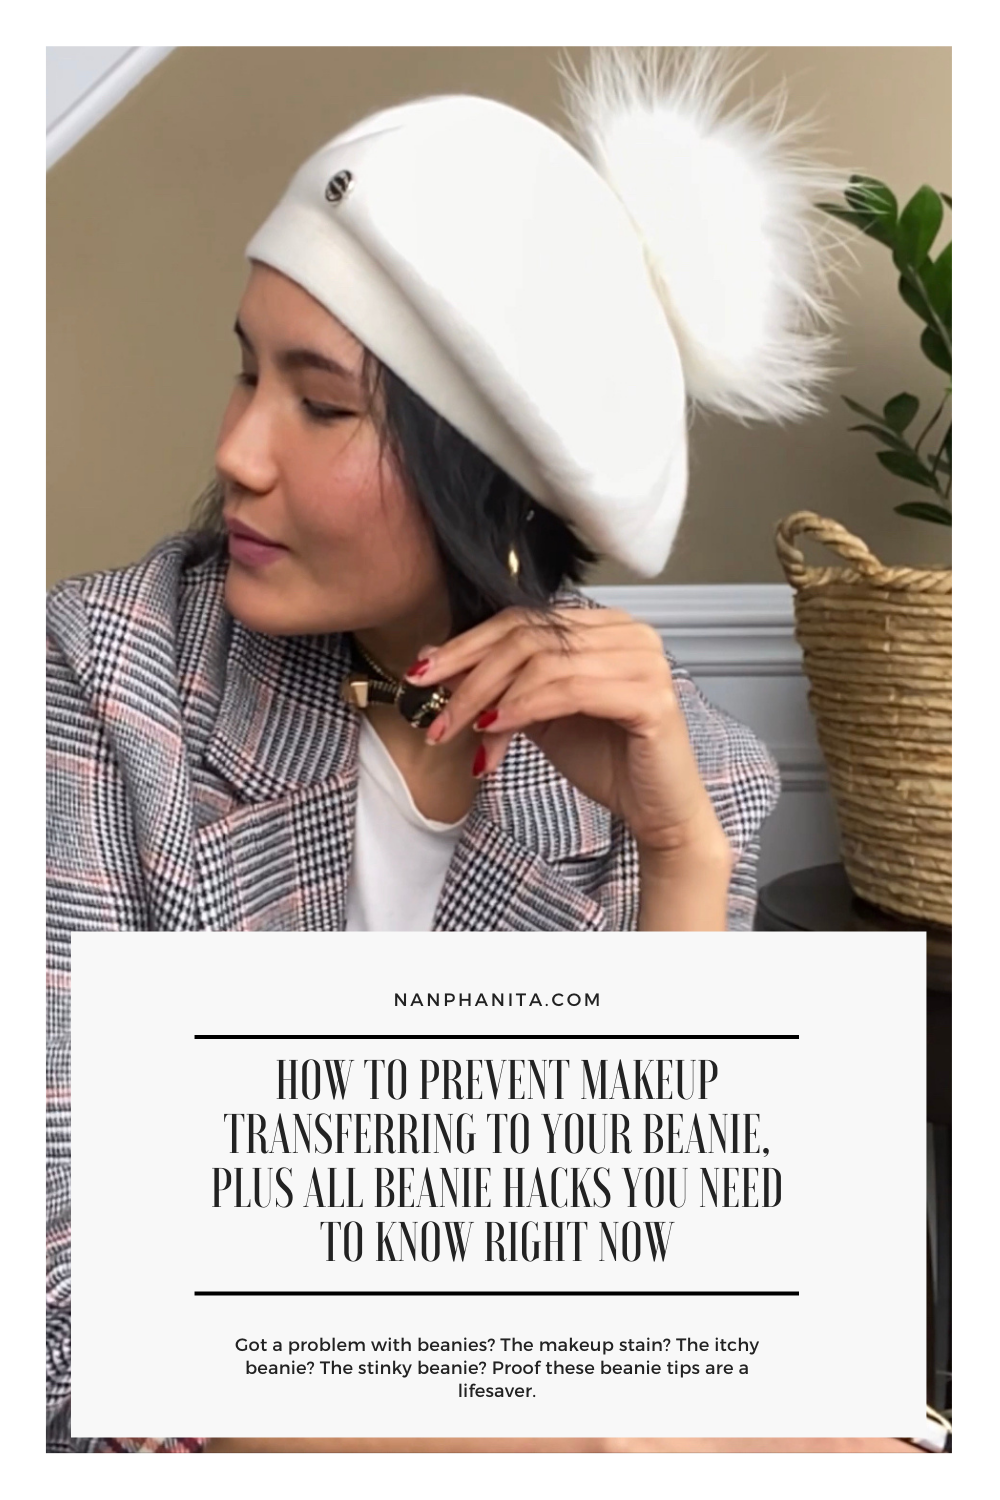 pint it pinterest nanphanita jacob is sharing a new blog post - how to prevent makeup transferring to your beanie plus all beanie hacks you need to know right now